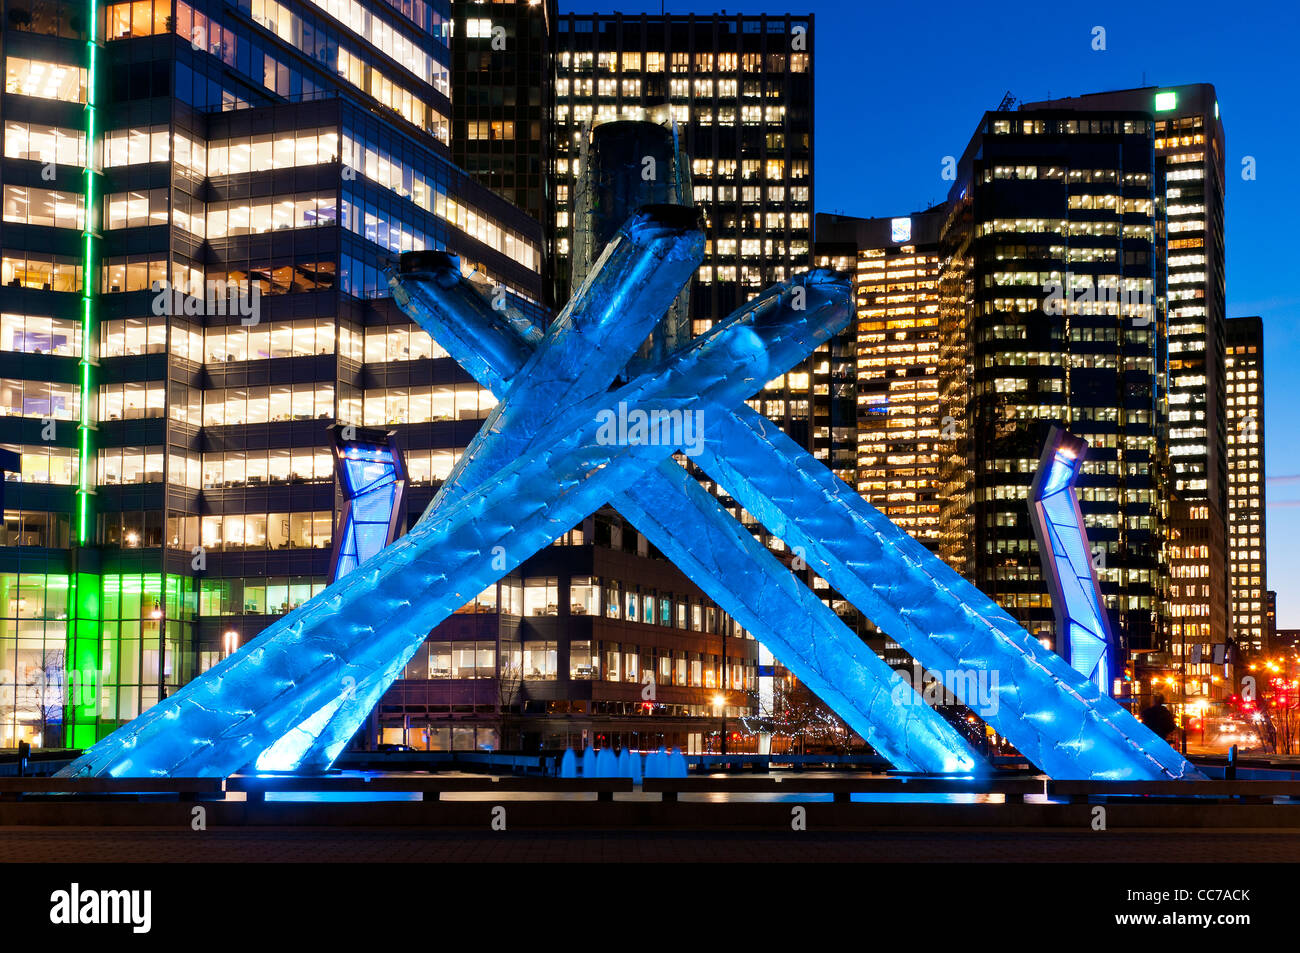 Vancouver 2010 Winter Olympic Games cauldron at night, Vancouver, British Columbia, Canada Stock Photo